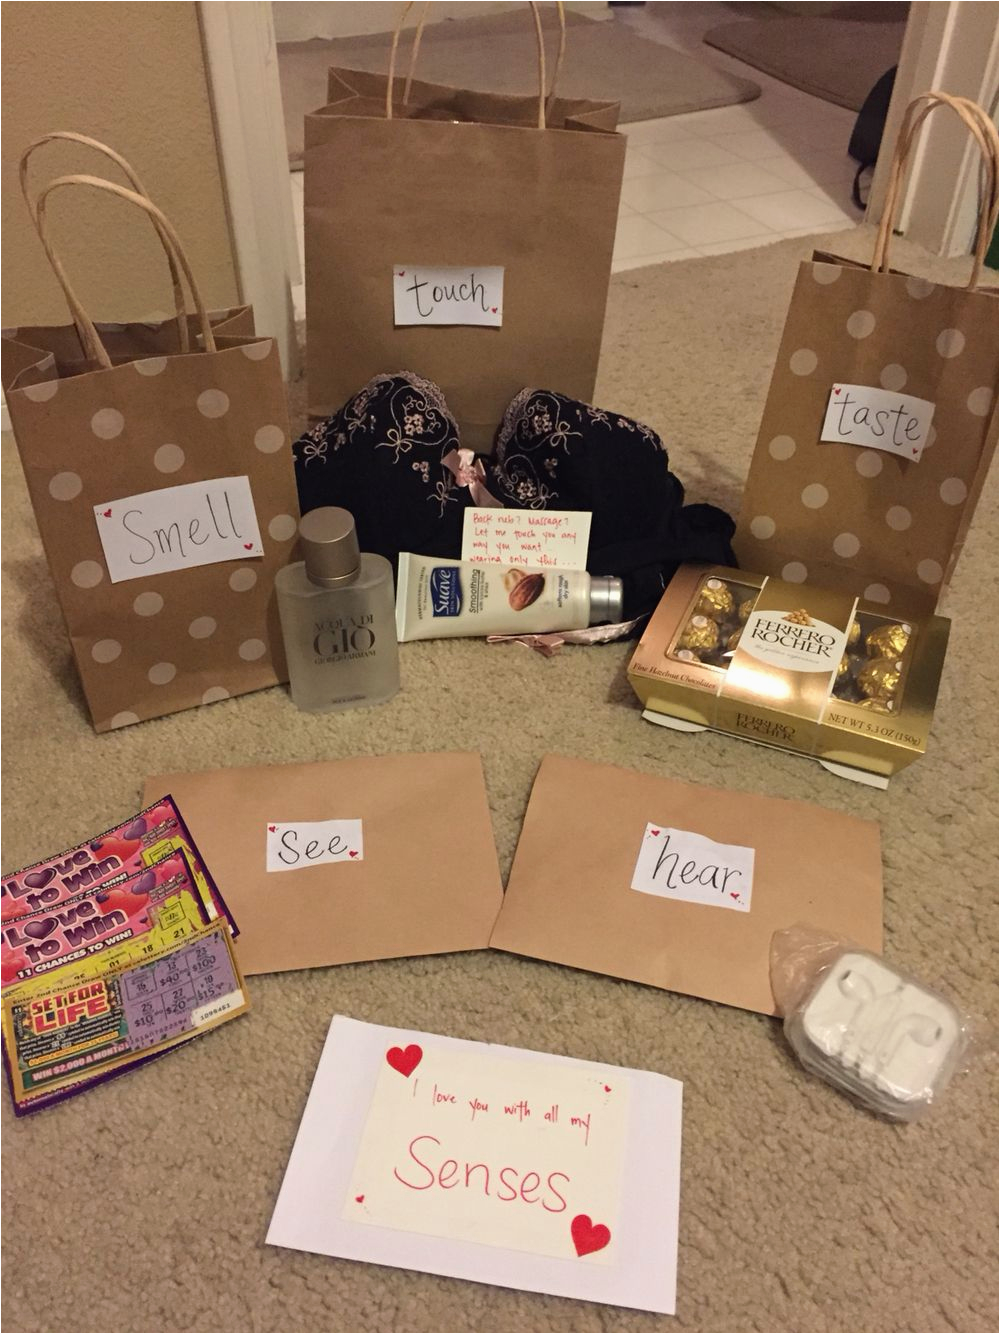 Low Budget Birthday Gifts for Boyfriend My Sensual Valentine 39 S Day Gift for My Hubby It Was Very